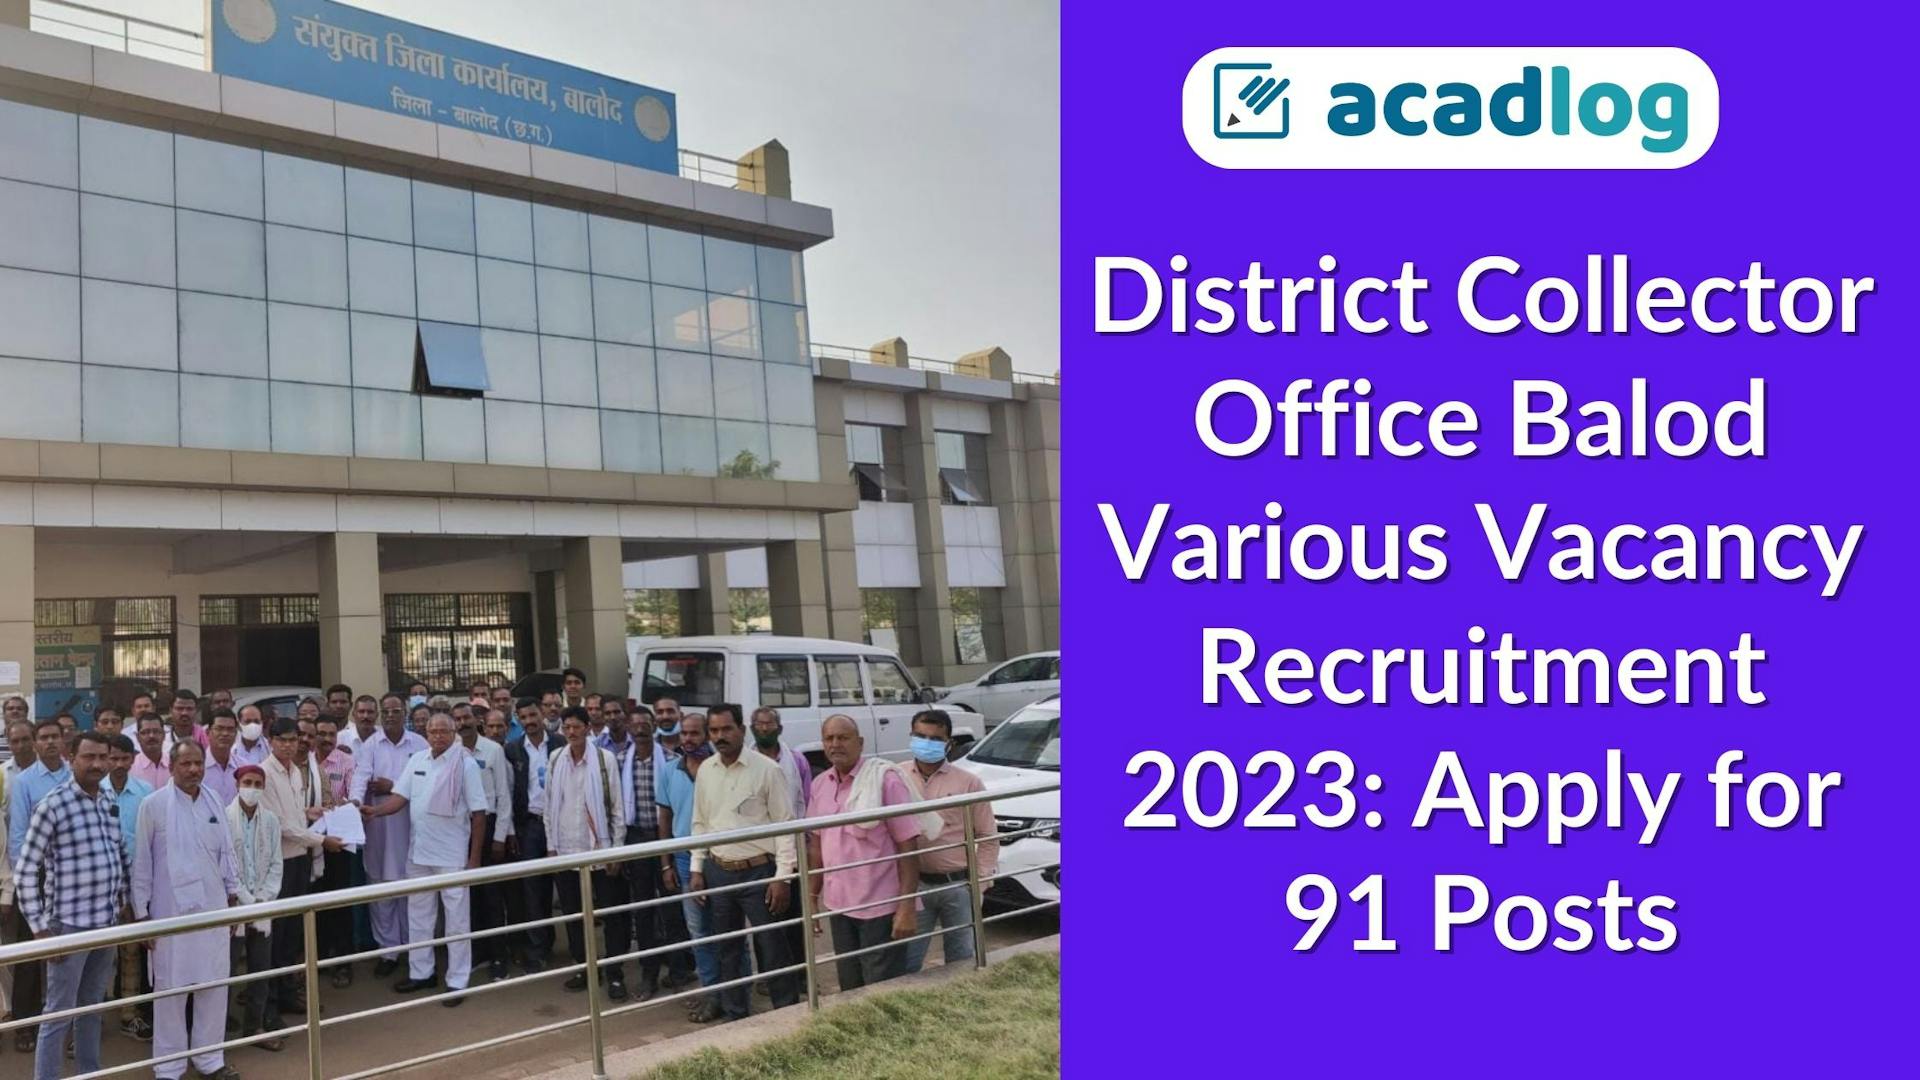 District Collector Office Balod Various Vacancy Recruitment 2023: Apply for 91 Posts